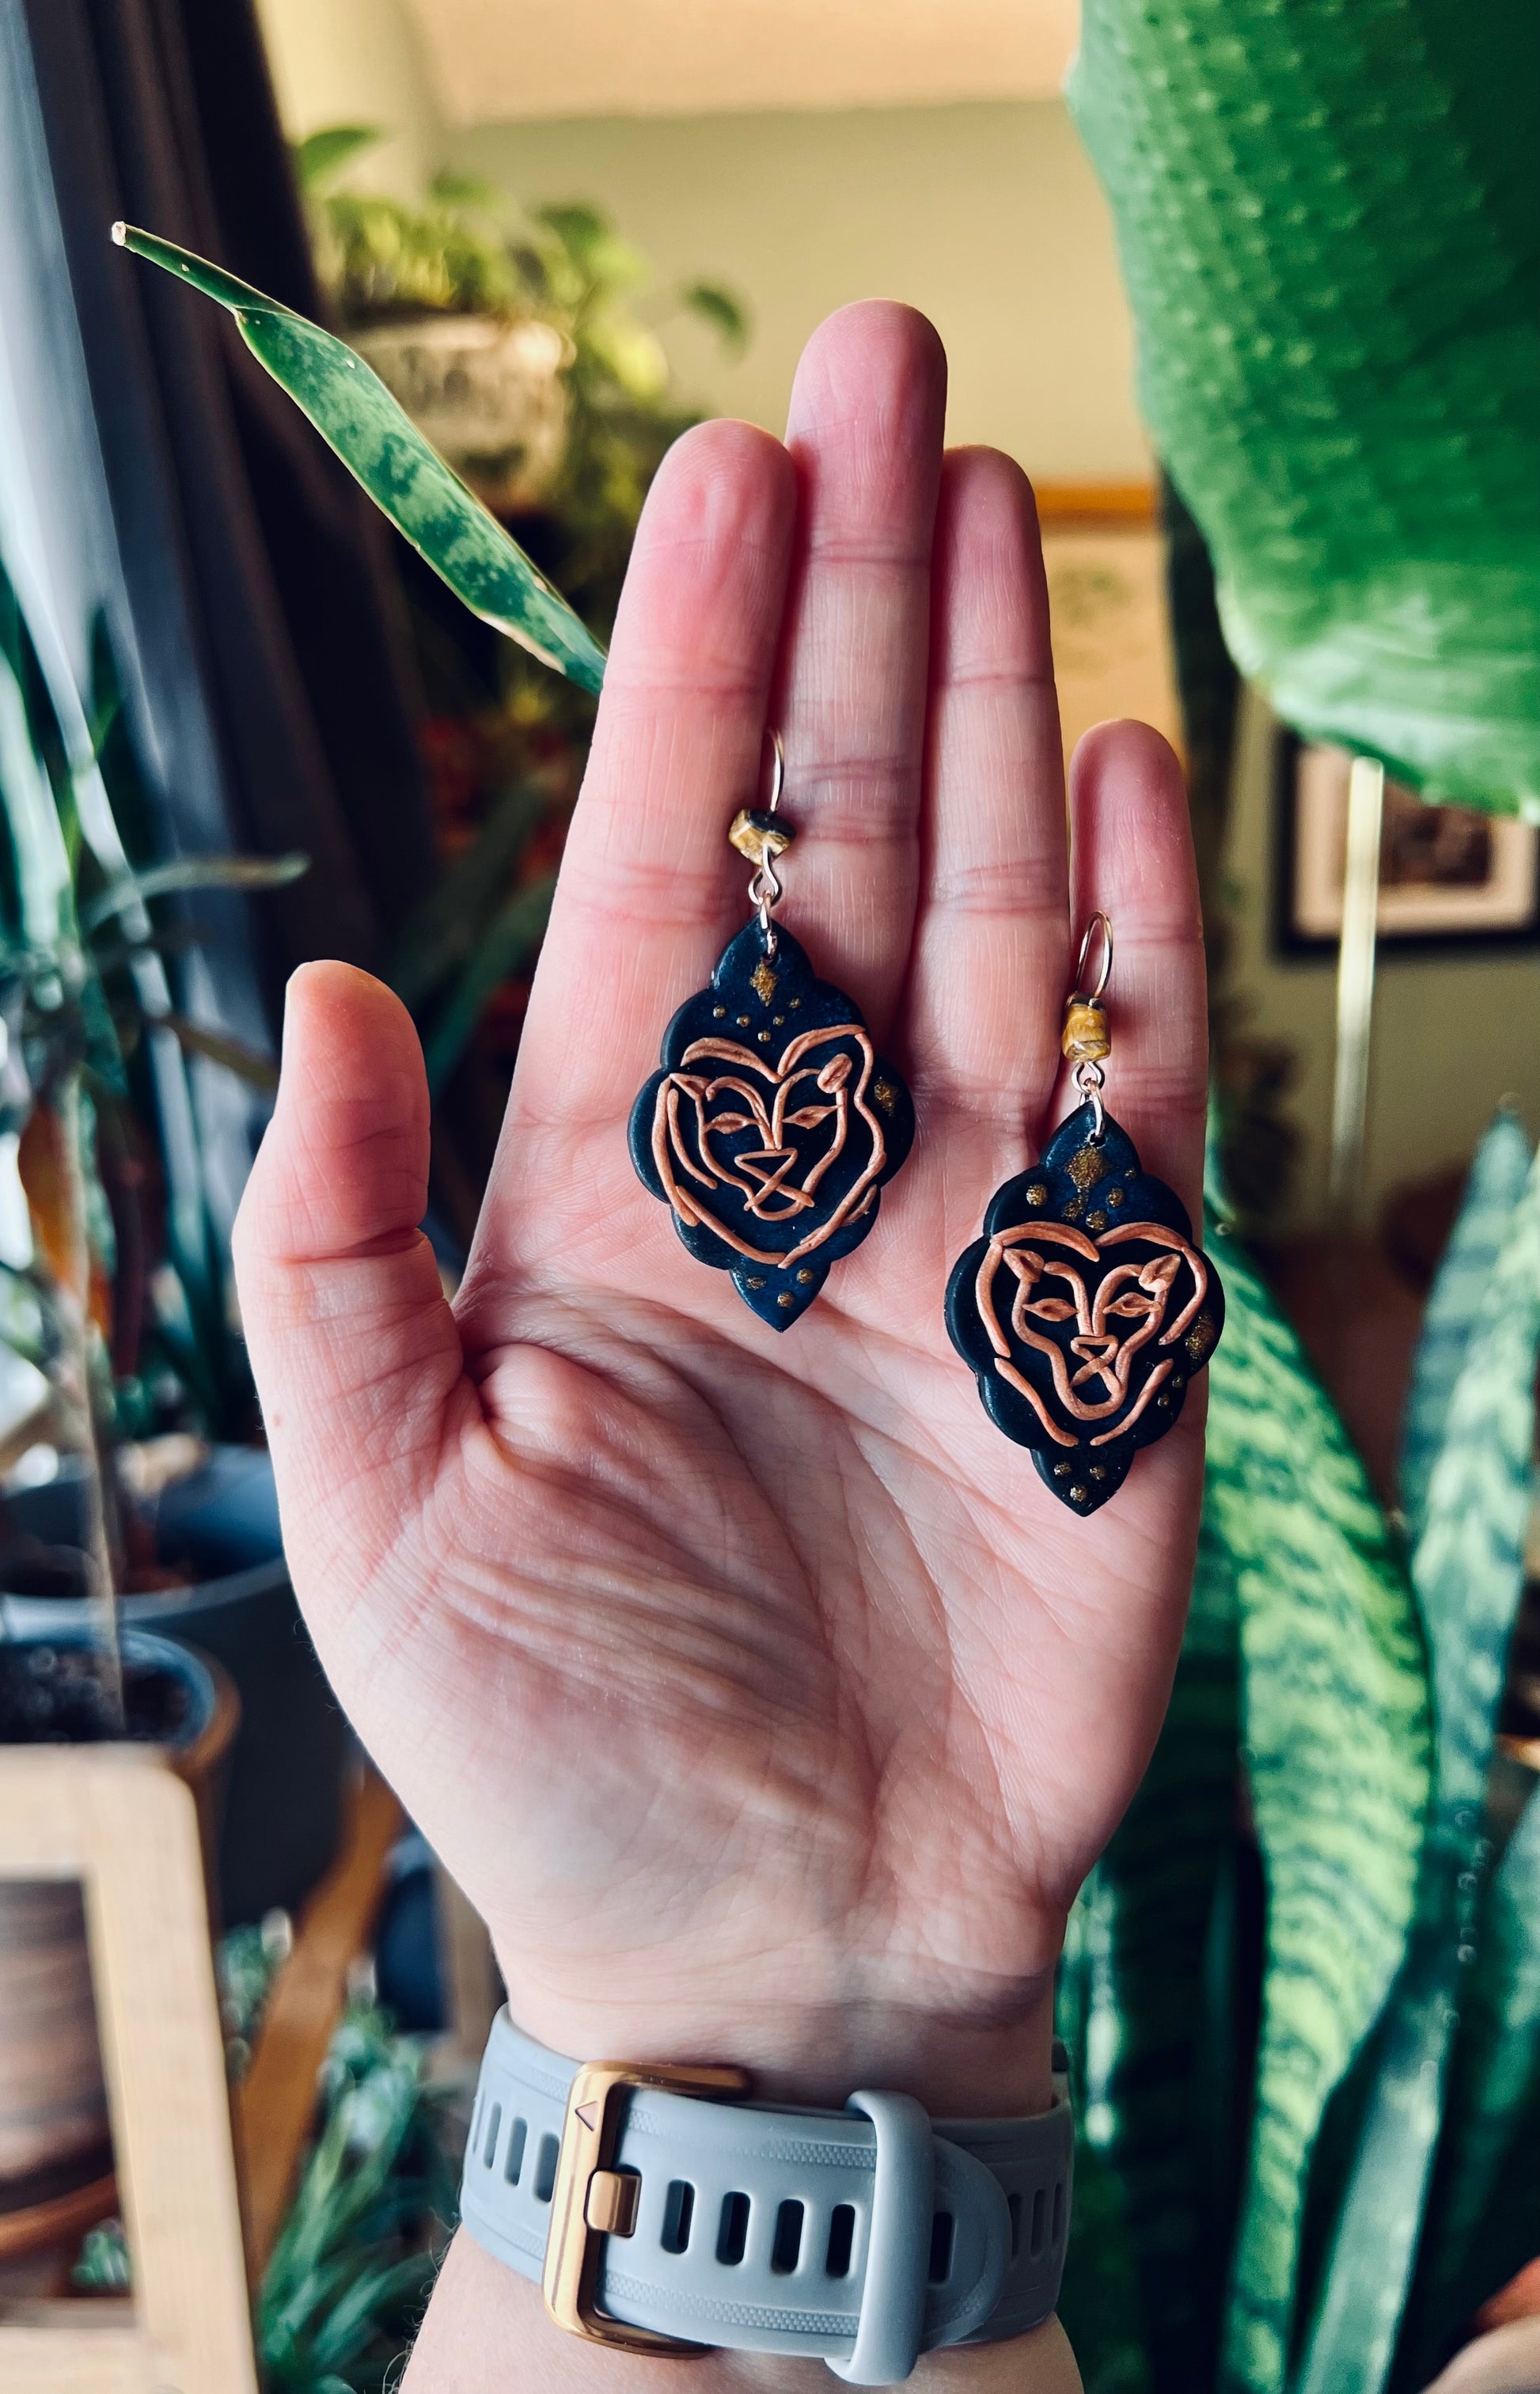 Regal Leo earrings symbolizing strength and confidence, crafted with exquisite detail. These artisanal pieces reflect the lion's courage and leadership, perfect for those born under the Leo sign. Embrace your inner lion with these majestic earrings. Shop now and command attention with your Leo pride!